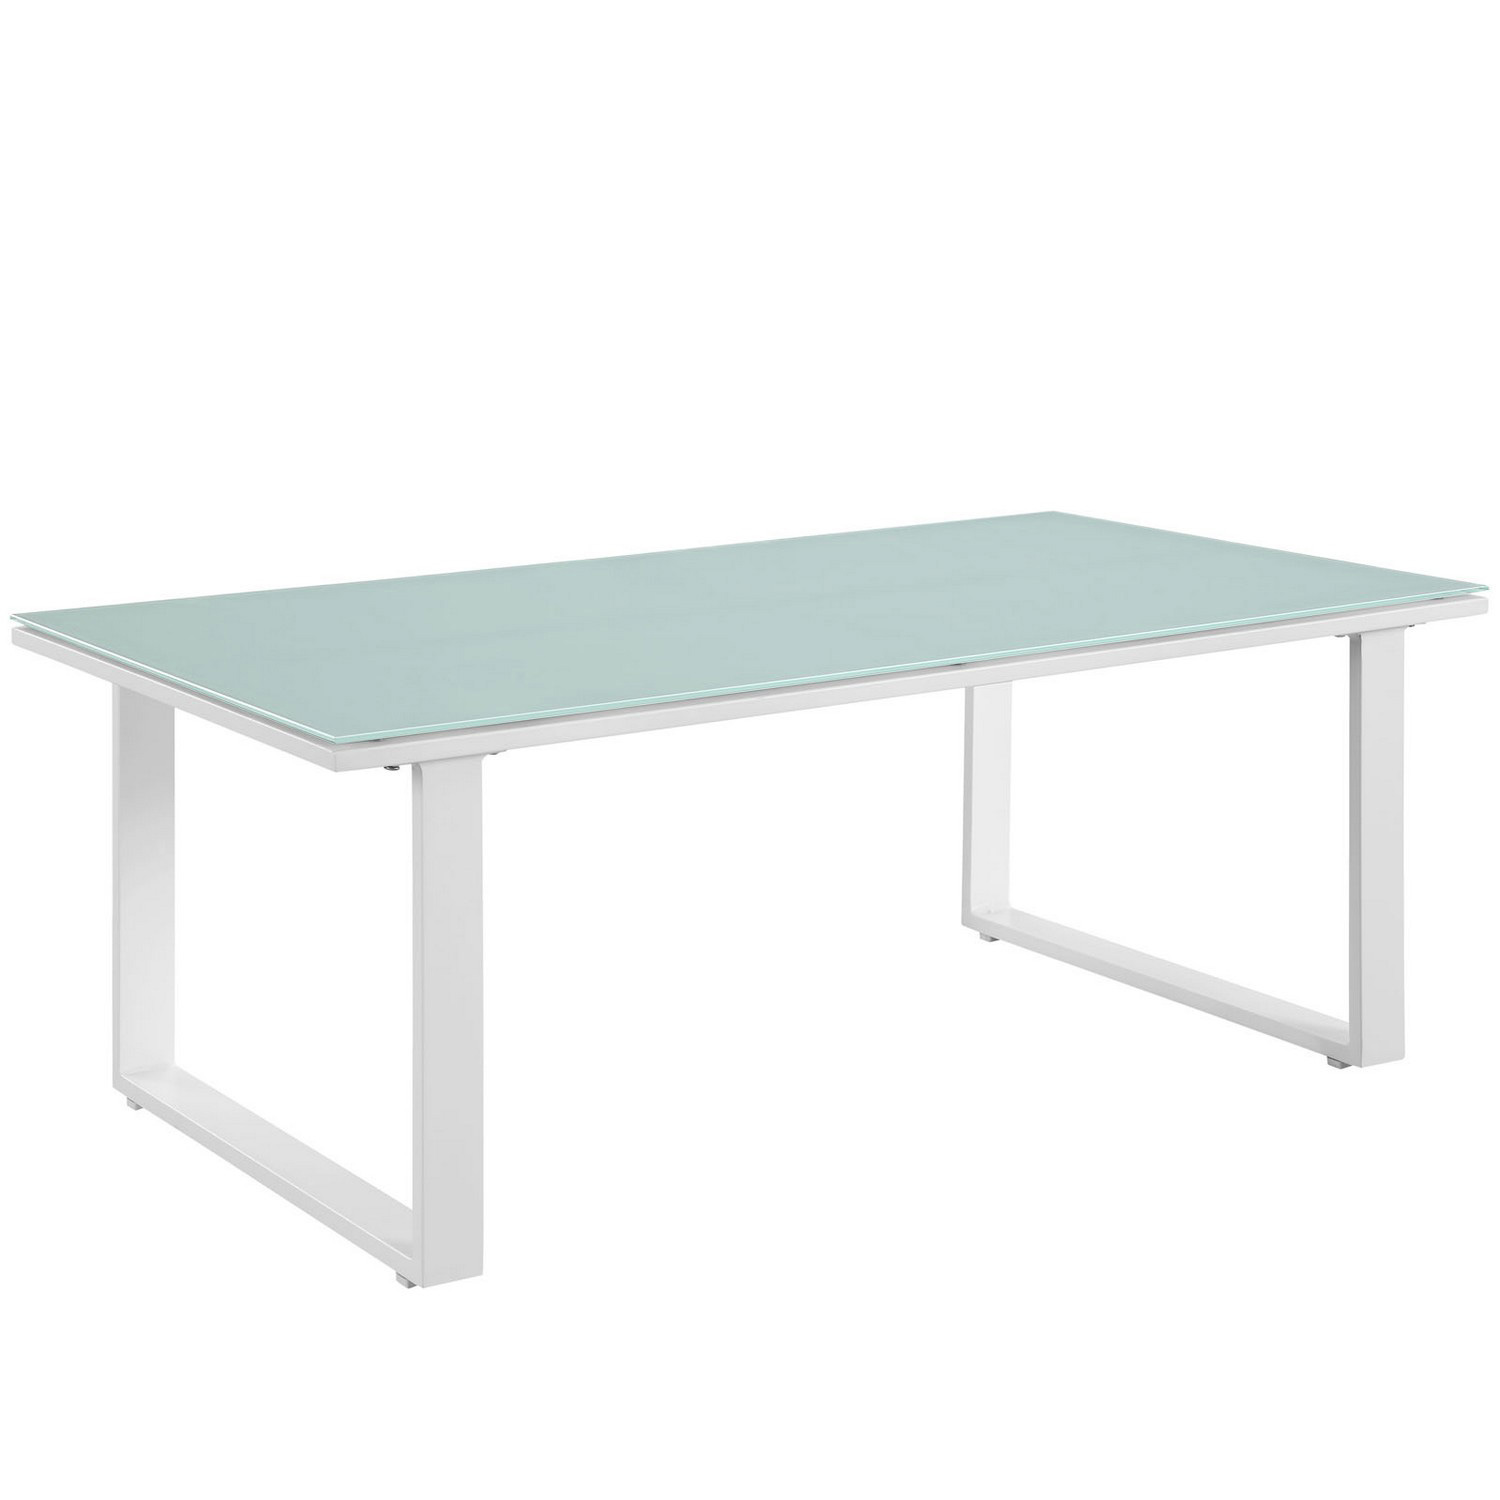 Modway Fortuna Outdoor Patio Coffee Table - White